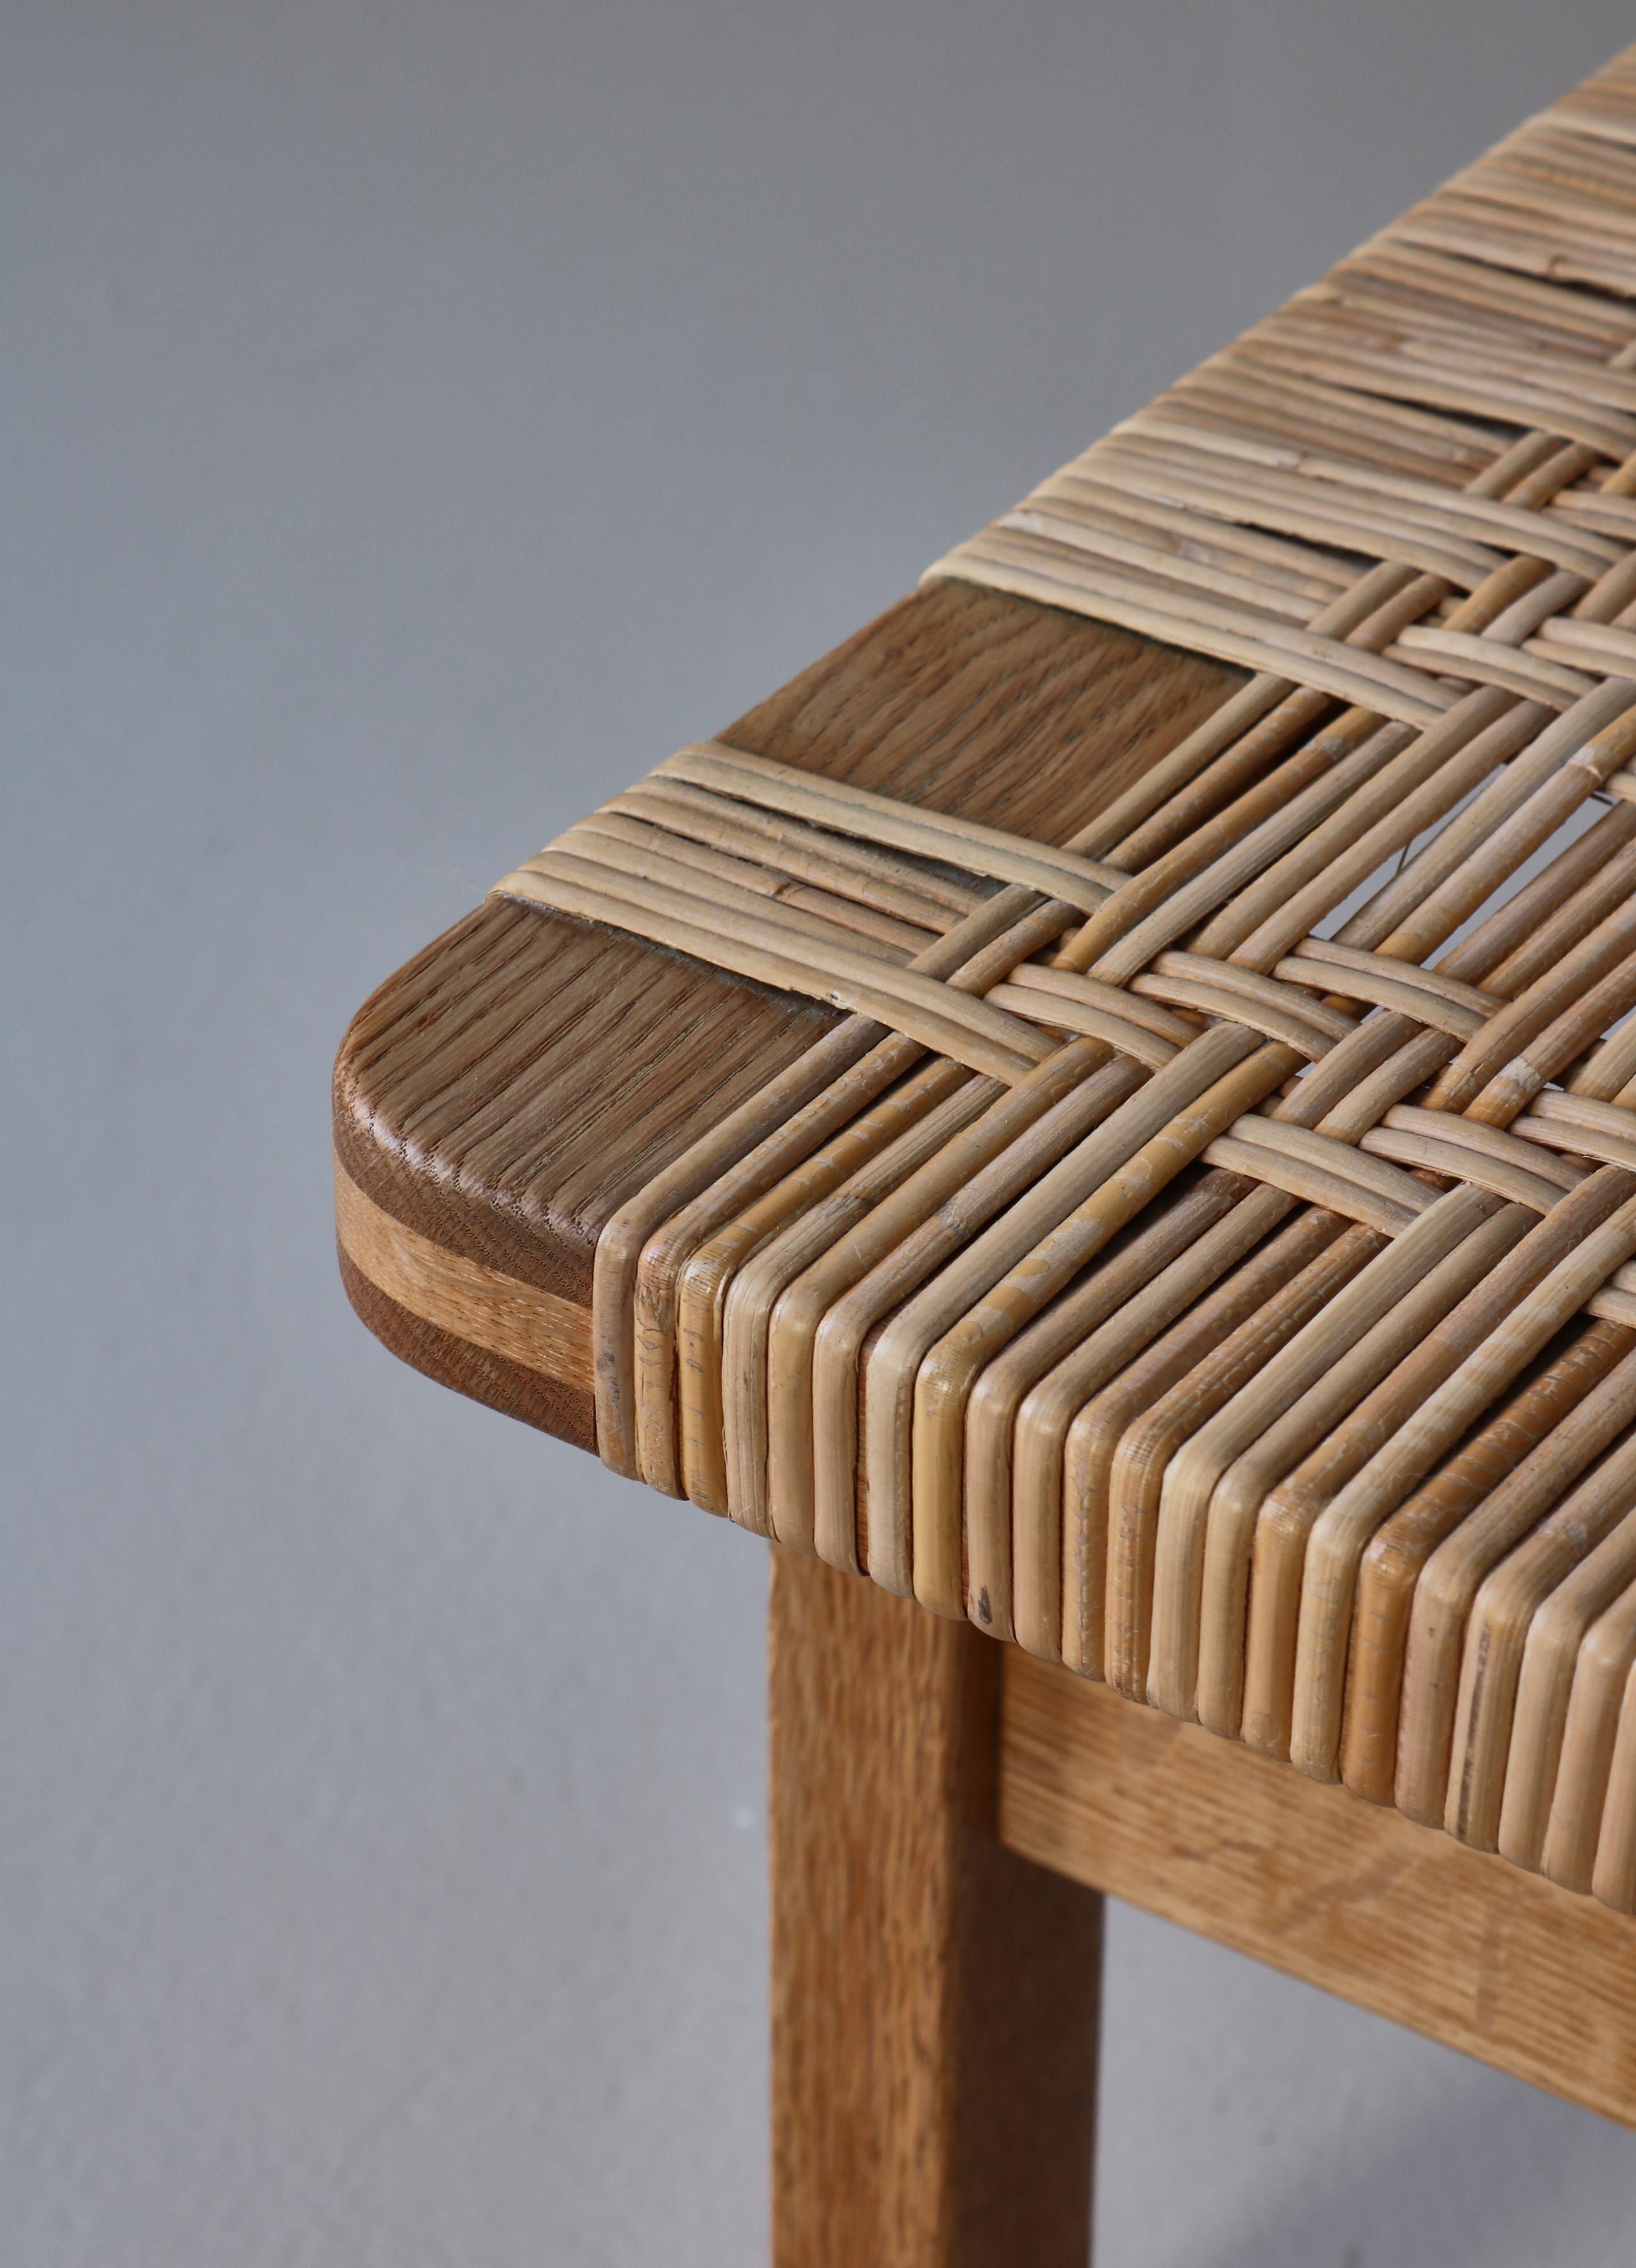 Borge Mogensen Large Side Table or Bench in Oak and Rattan Cane, 1960s, Denmark For Sale 3